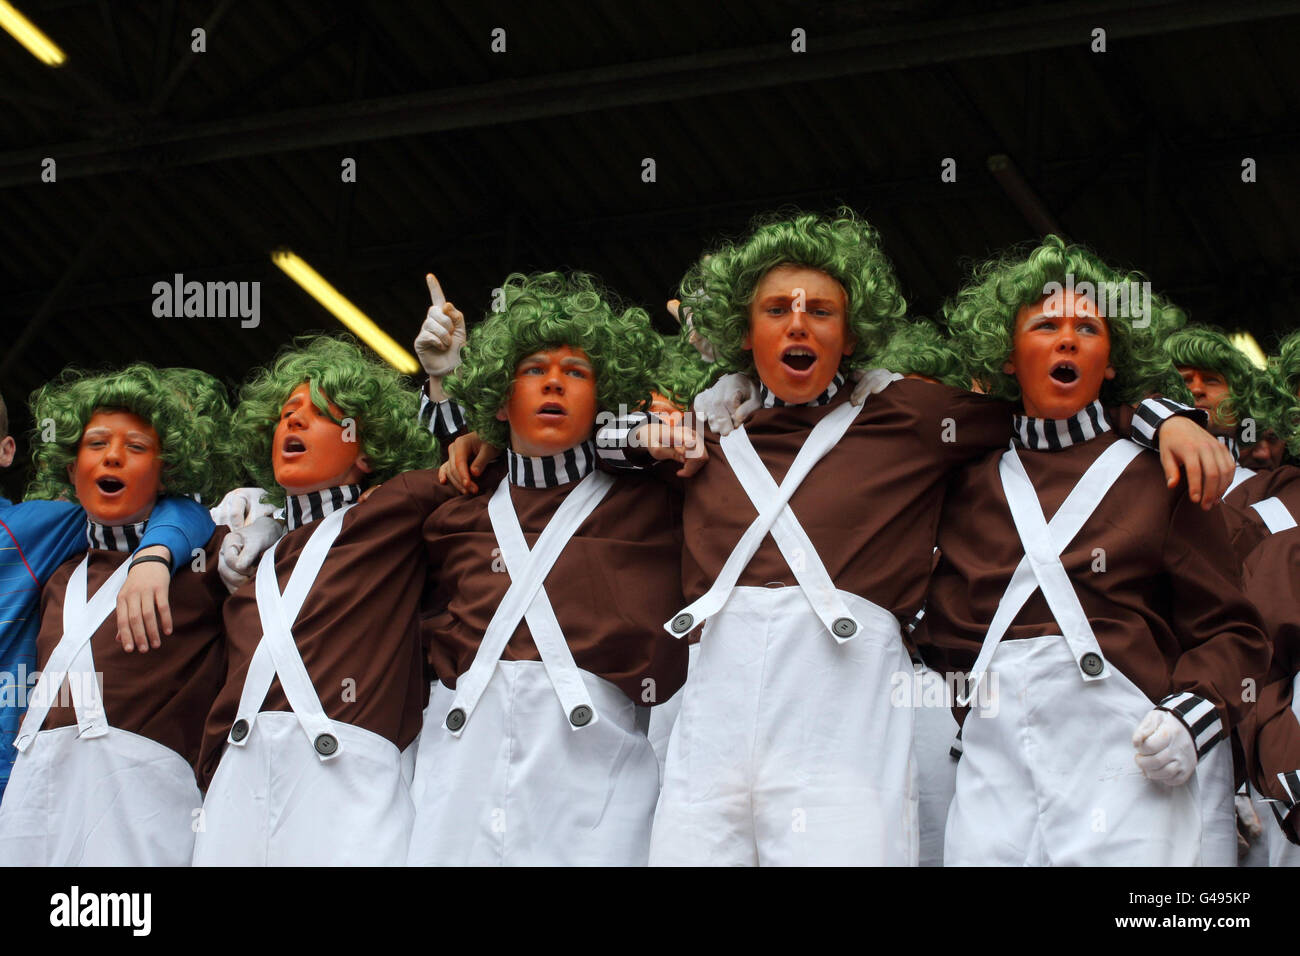 Harltlepool United fans dressed up as Umpa Lumpa's during the npower Football League One match at The Valley, Charlton. Stock Photo